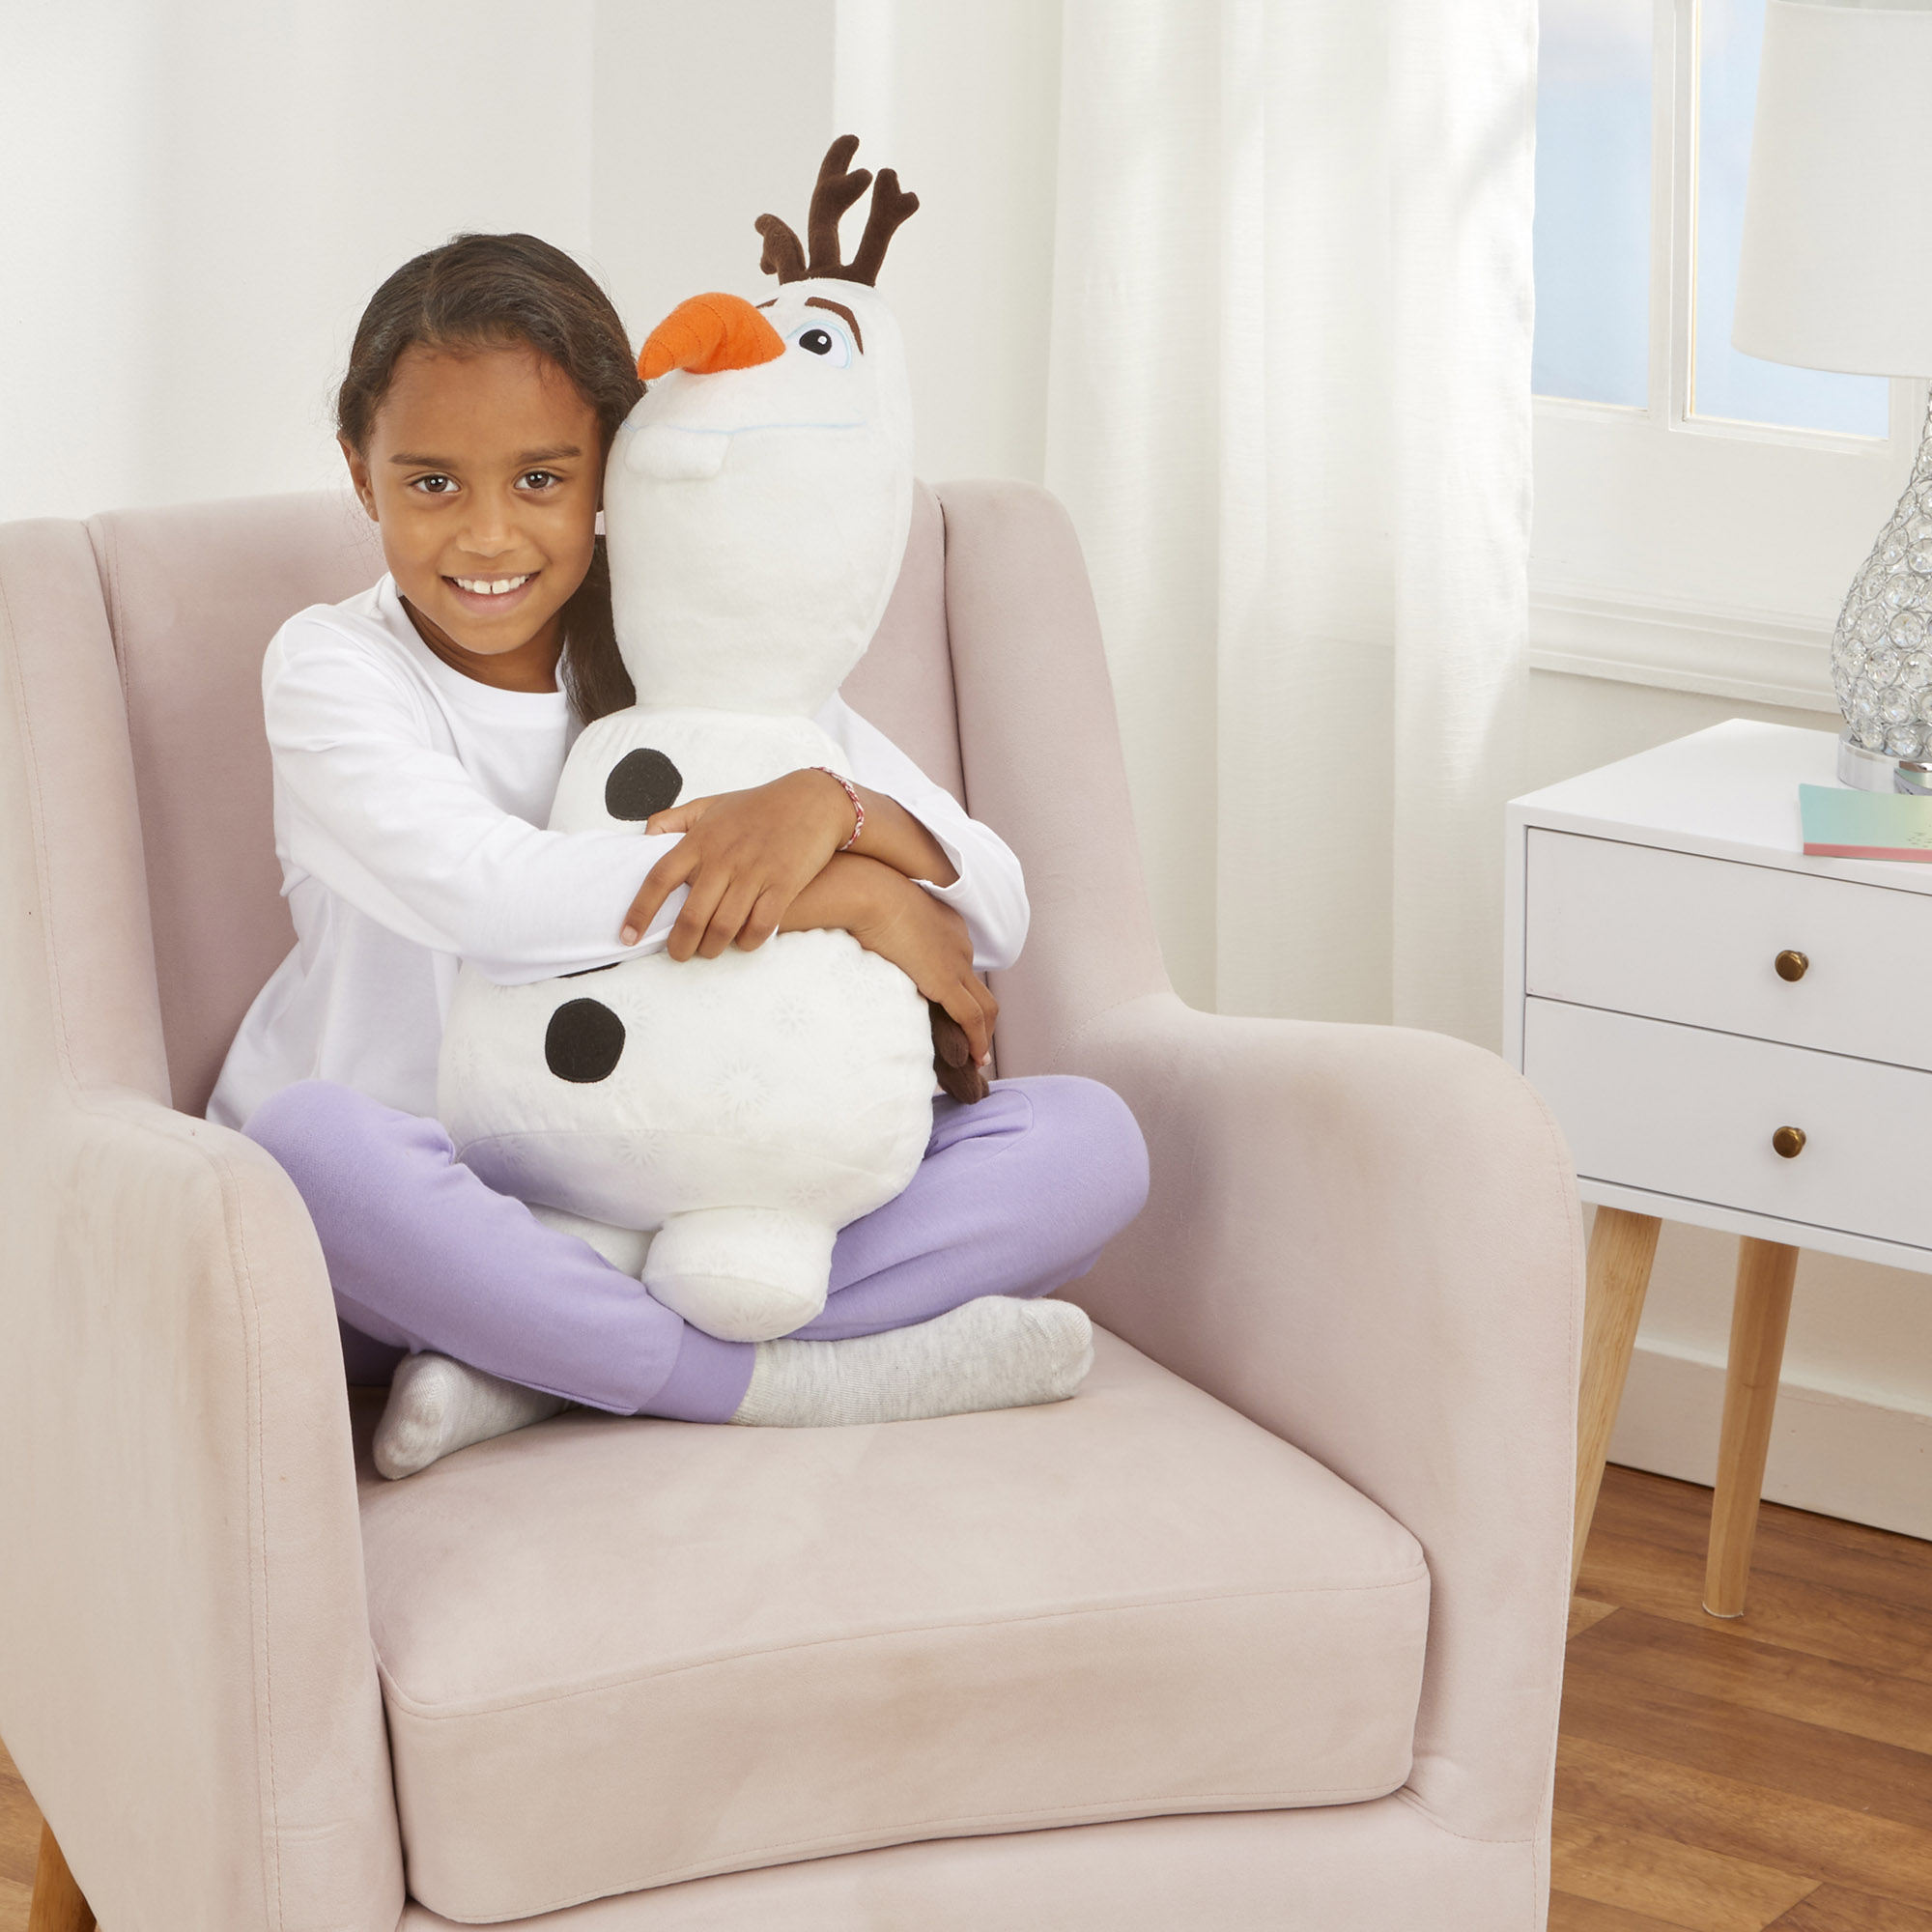 Disney Frozen Kids Olaf Bedding Plush Cuddle and Decorative Pillow Buddy, White - image 3 of 7